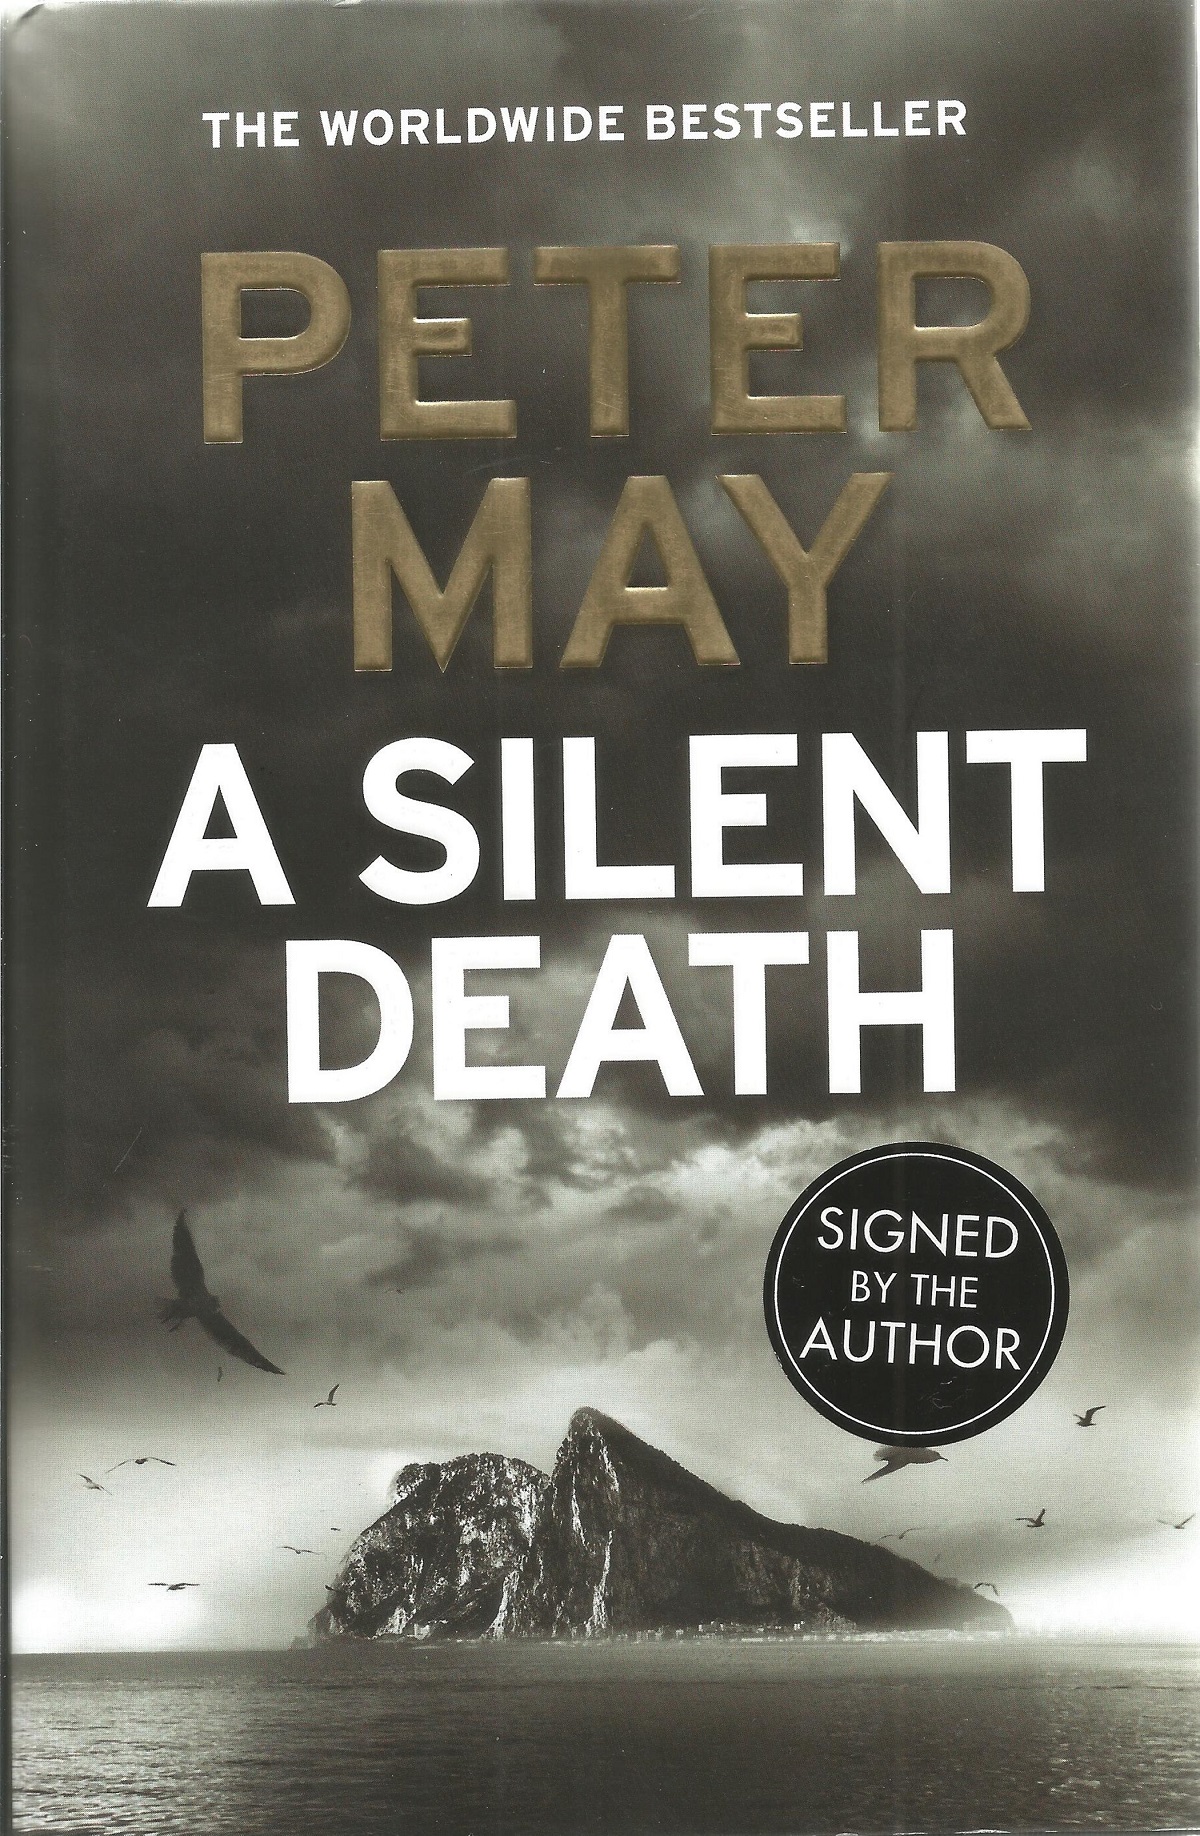 Peter May signed hardback book A Silent Death. Good condition. All autographs come with a